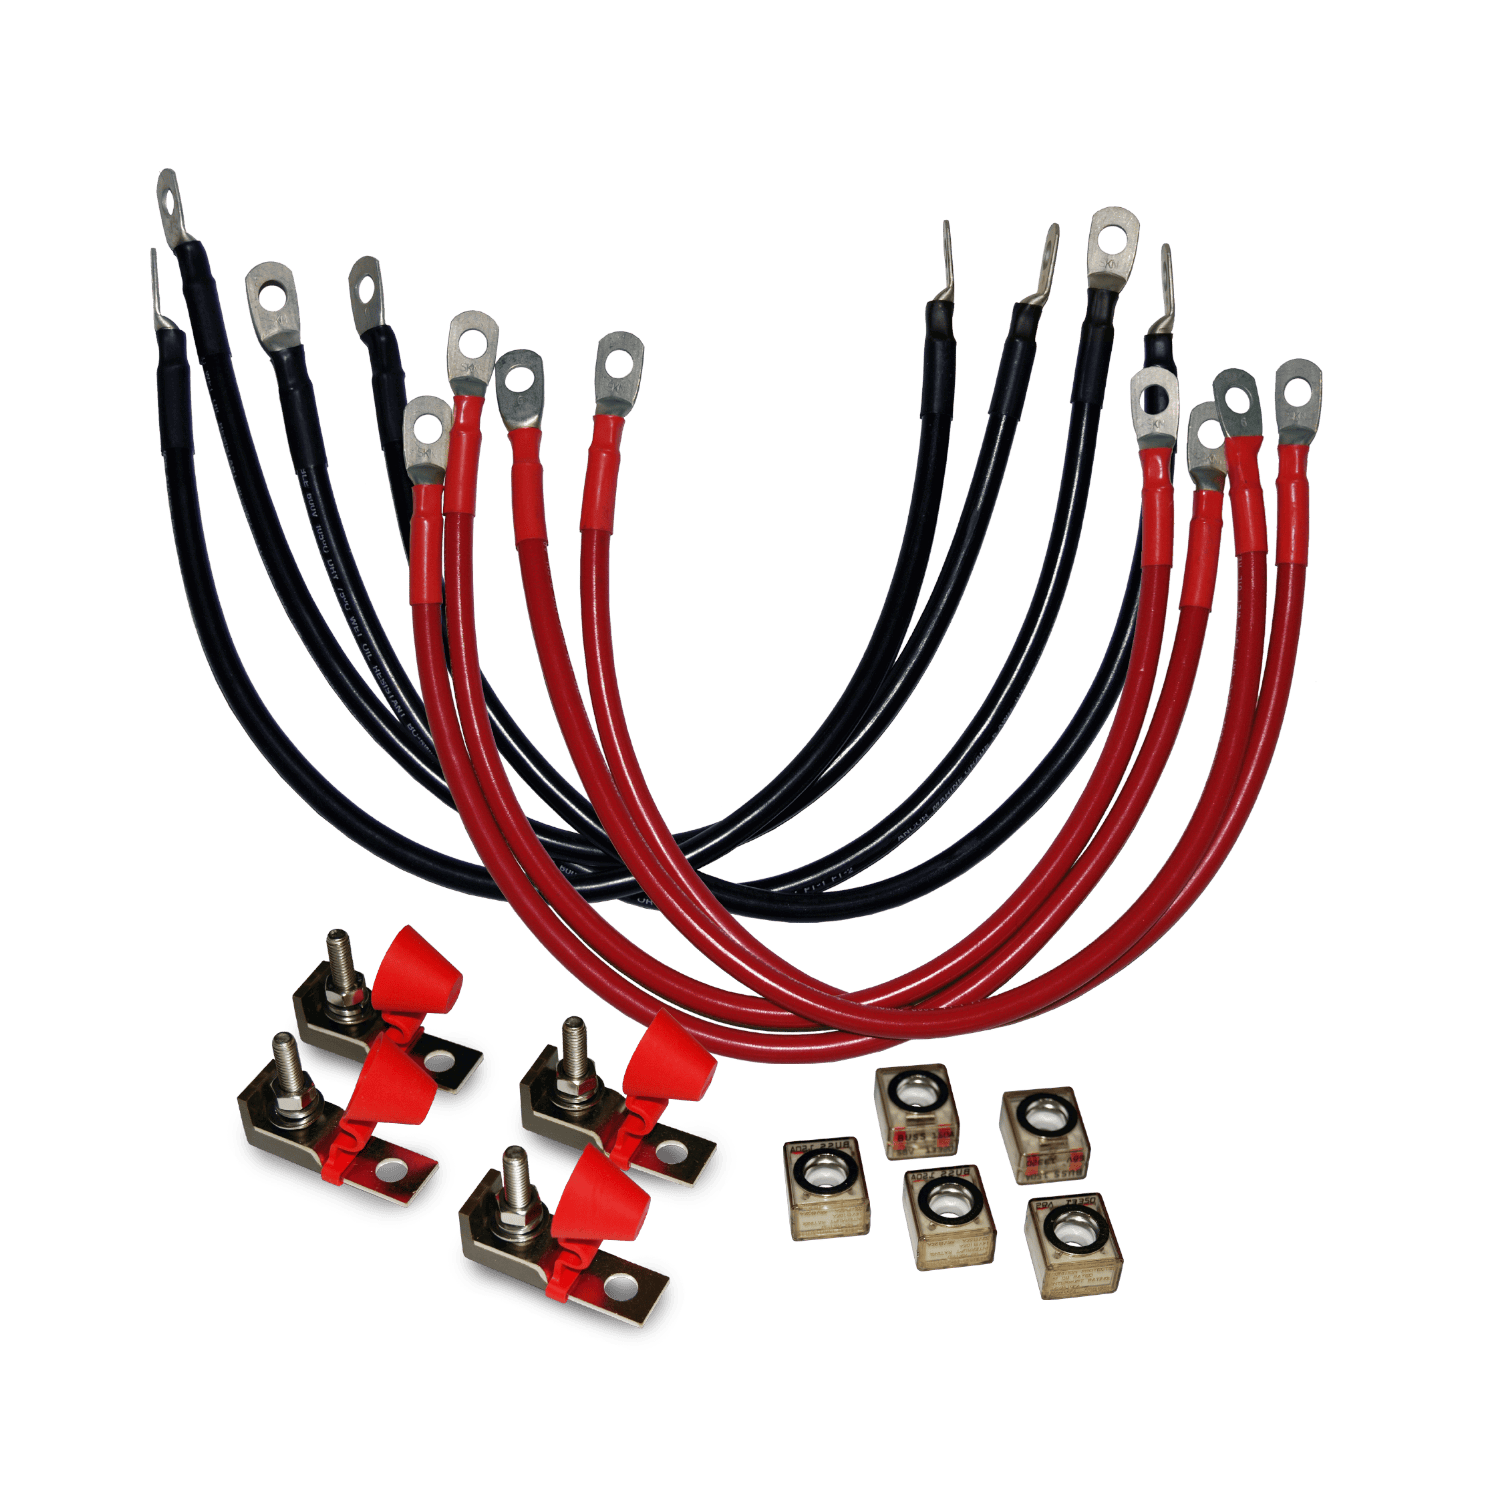 Parallel Wiring Kit with Safety Fuse Protection